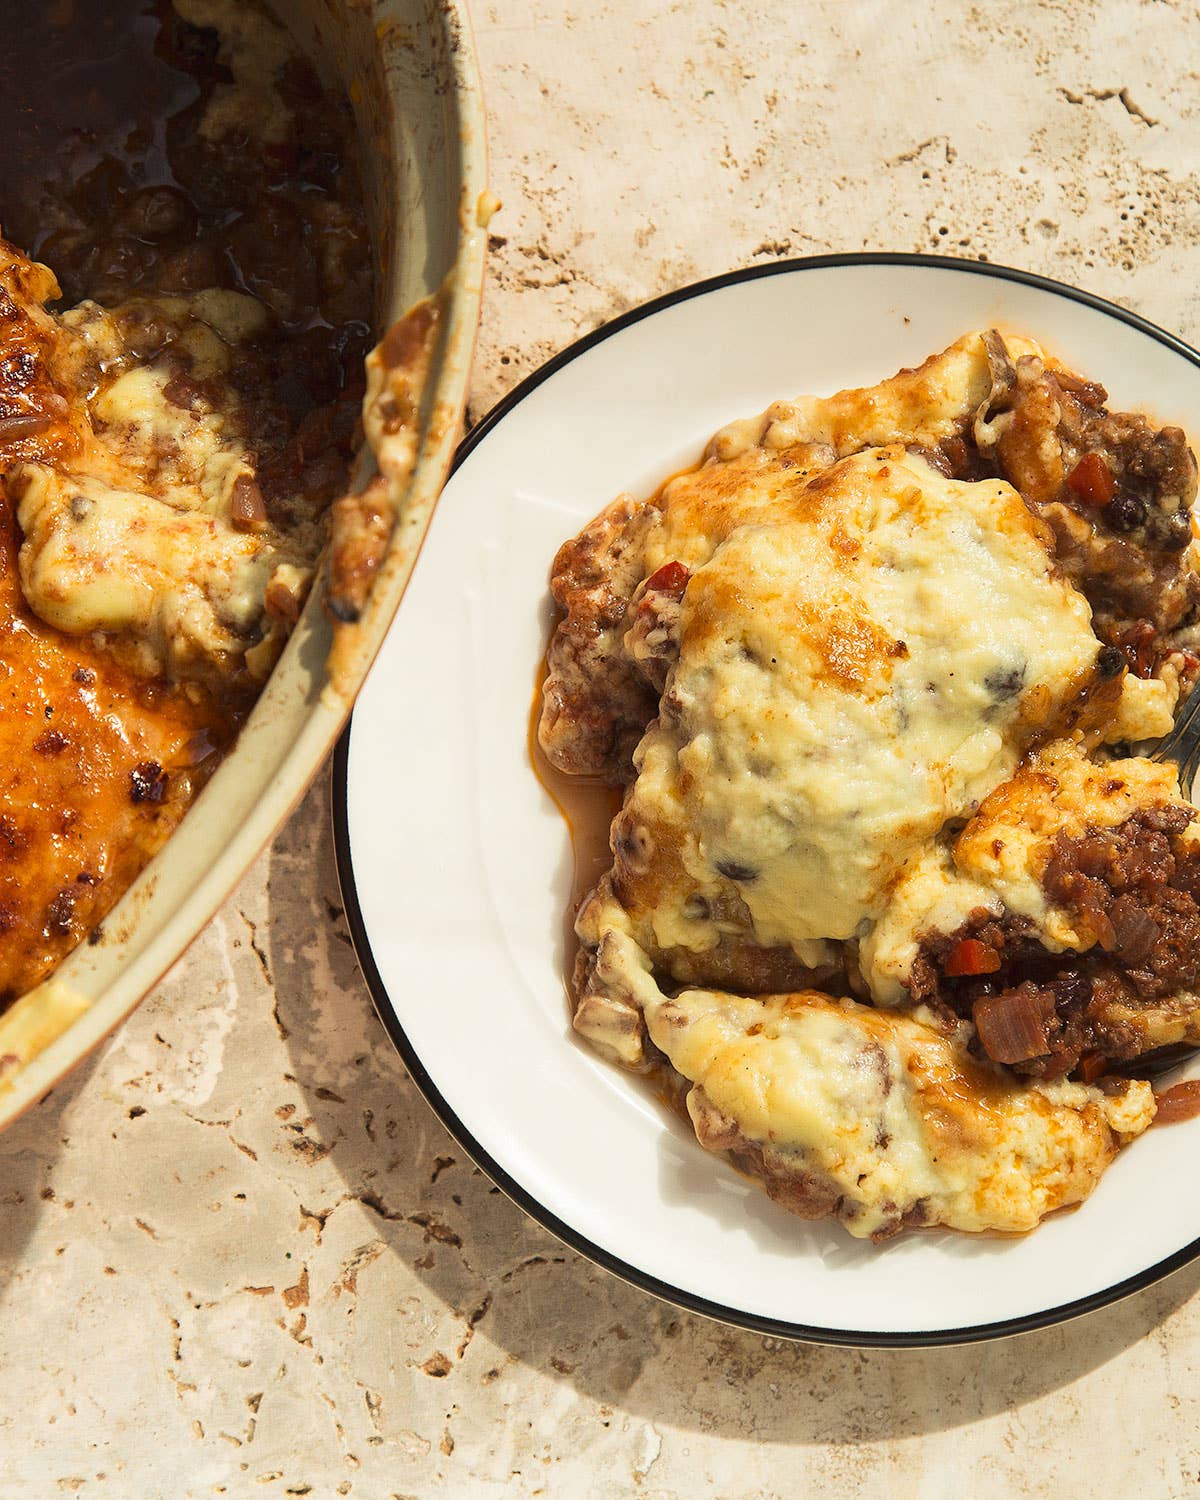 Greek Moussaka is the One-Dish Meal With a Little Bit of Everything